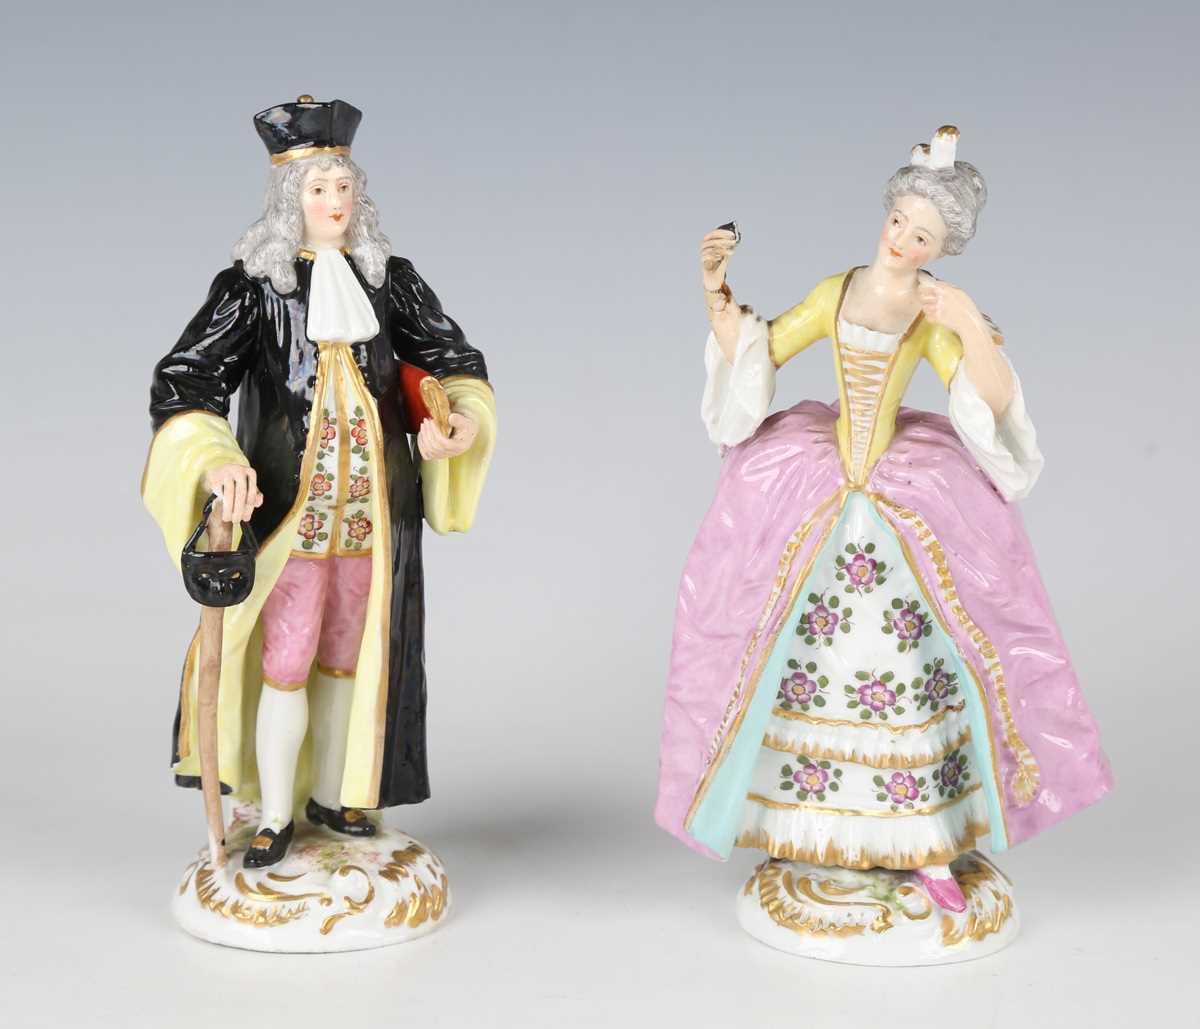 A pair of Paris porcelain Commedia dell'Arte style figures, early 20th century, he wearing a black